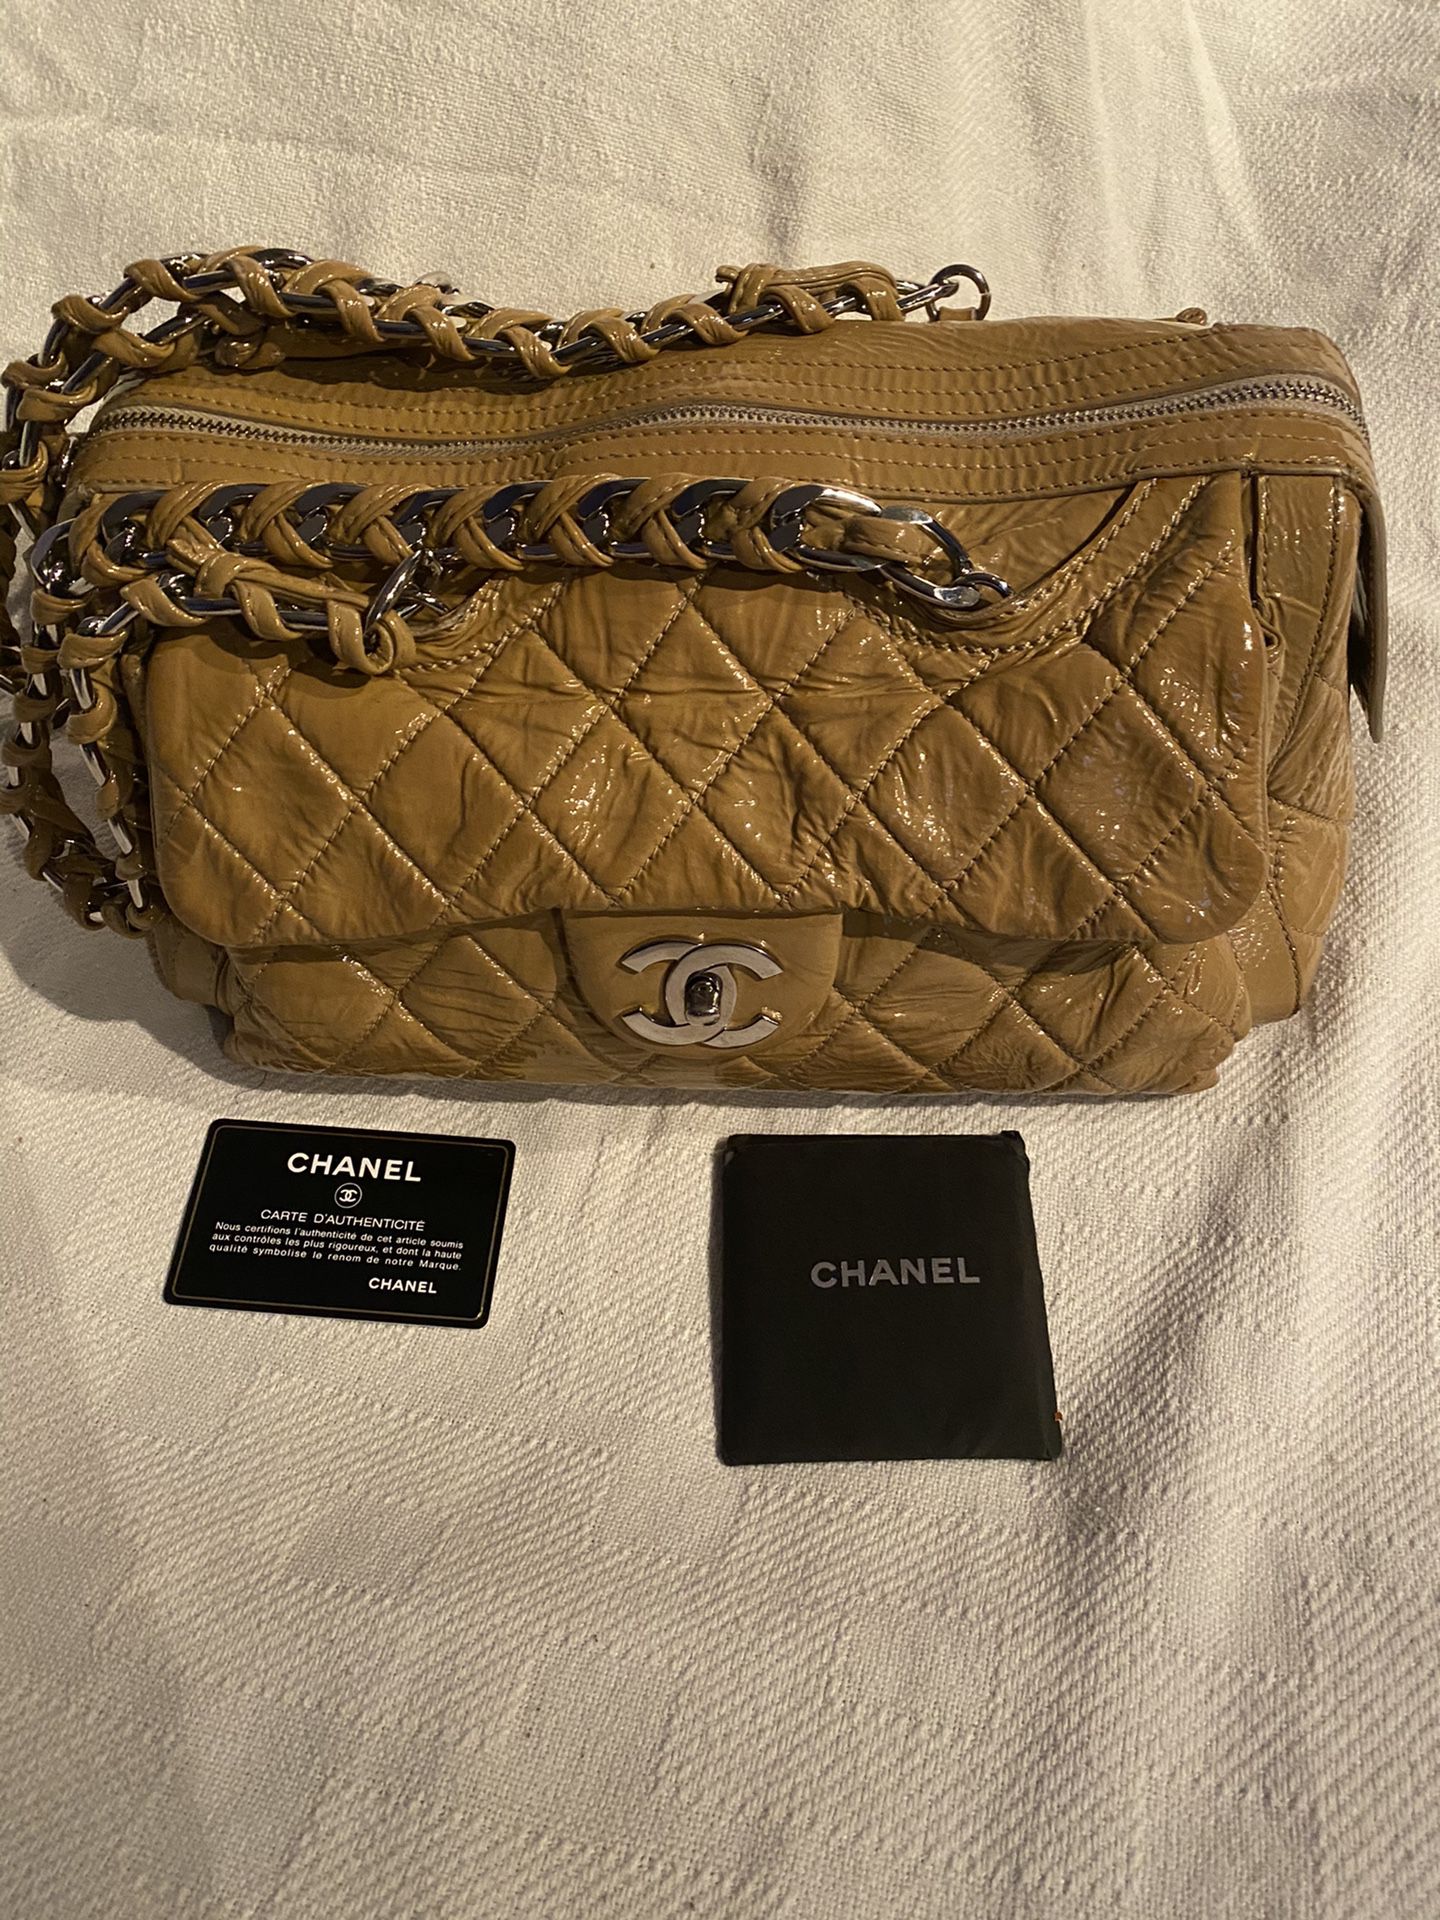 Chanel Patent Leather Purse